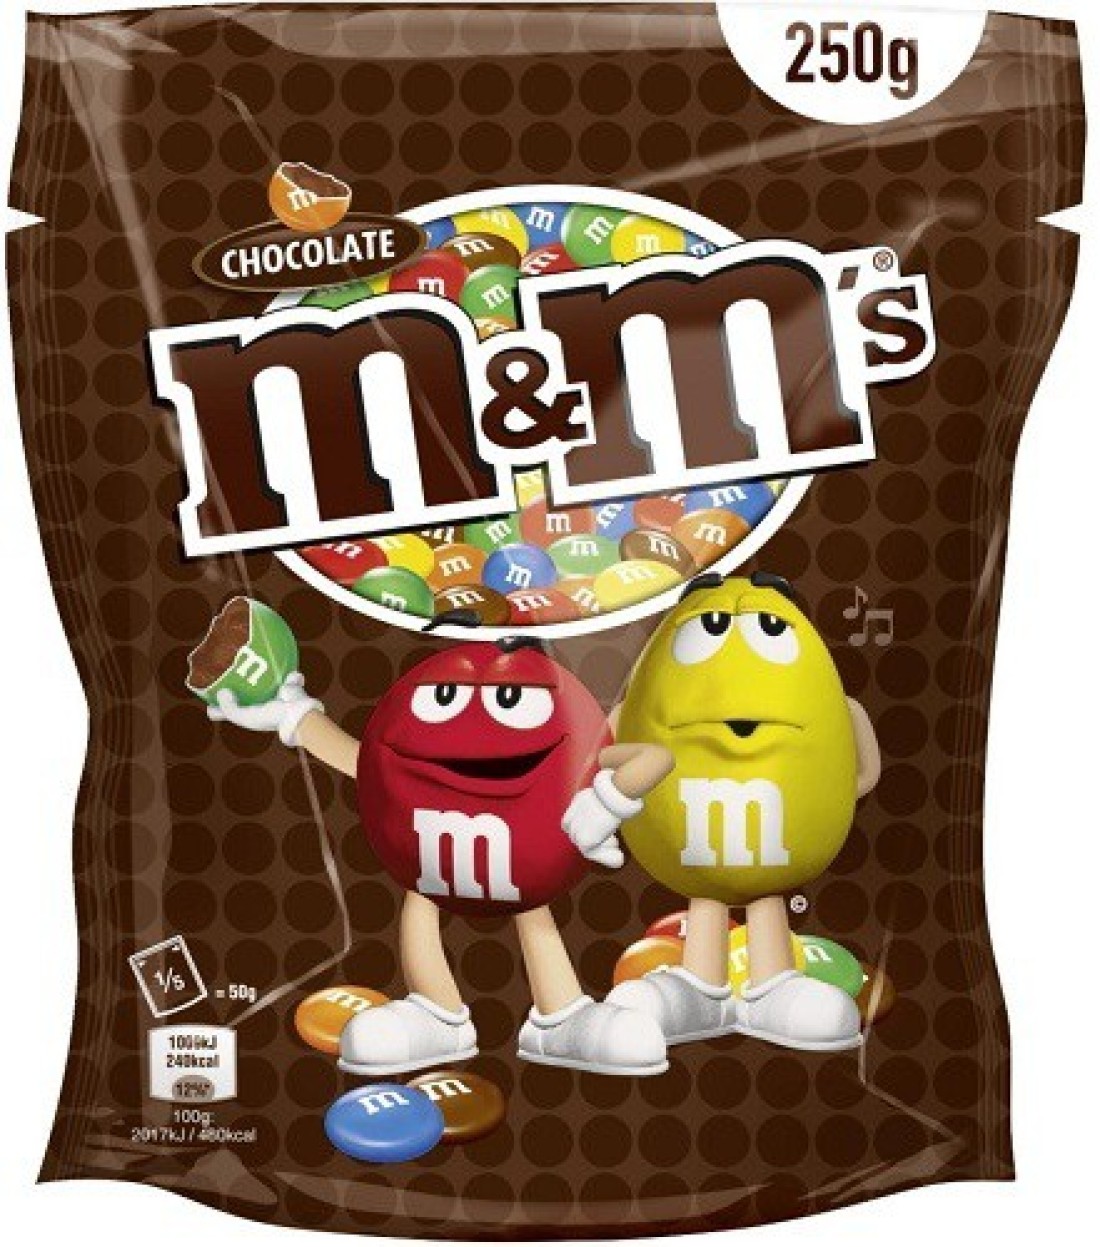 m&m's Chocolate in Sugar Shell Bites Price in India - Buy m&m's Chocolate  in Sugar Shell Bites online at